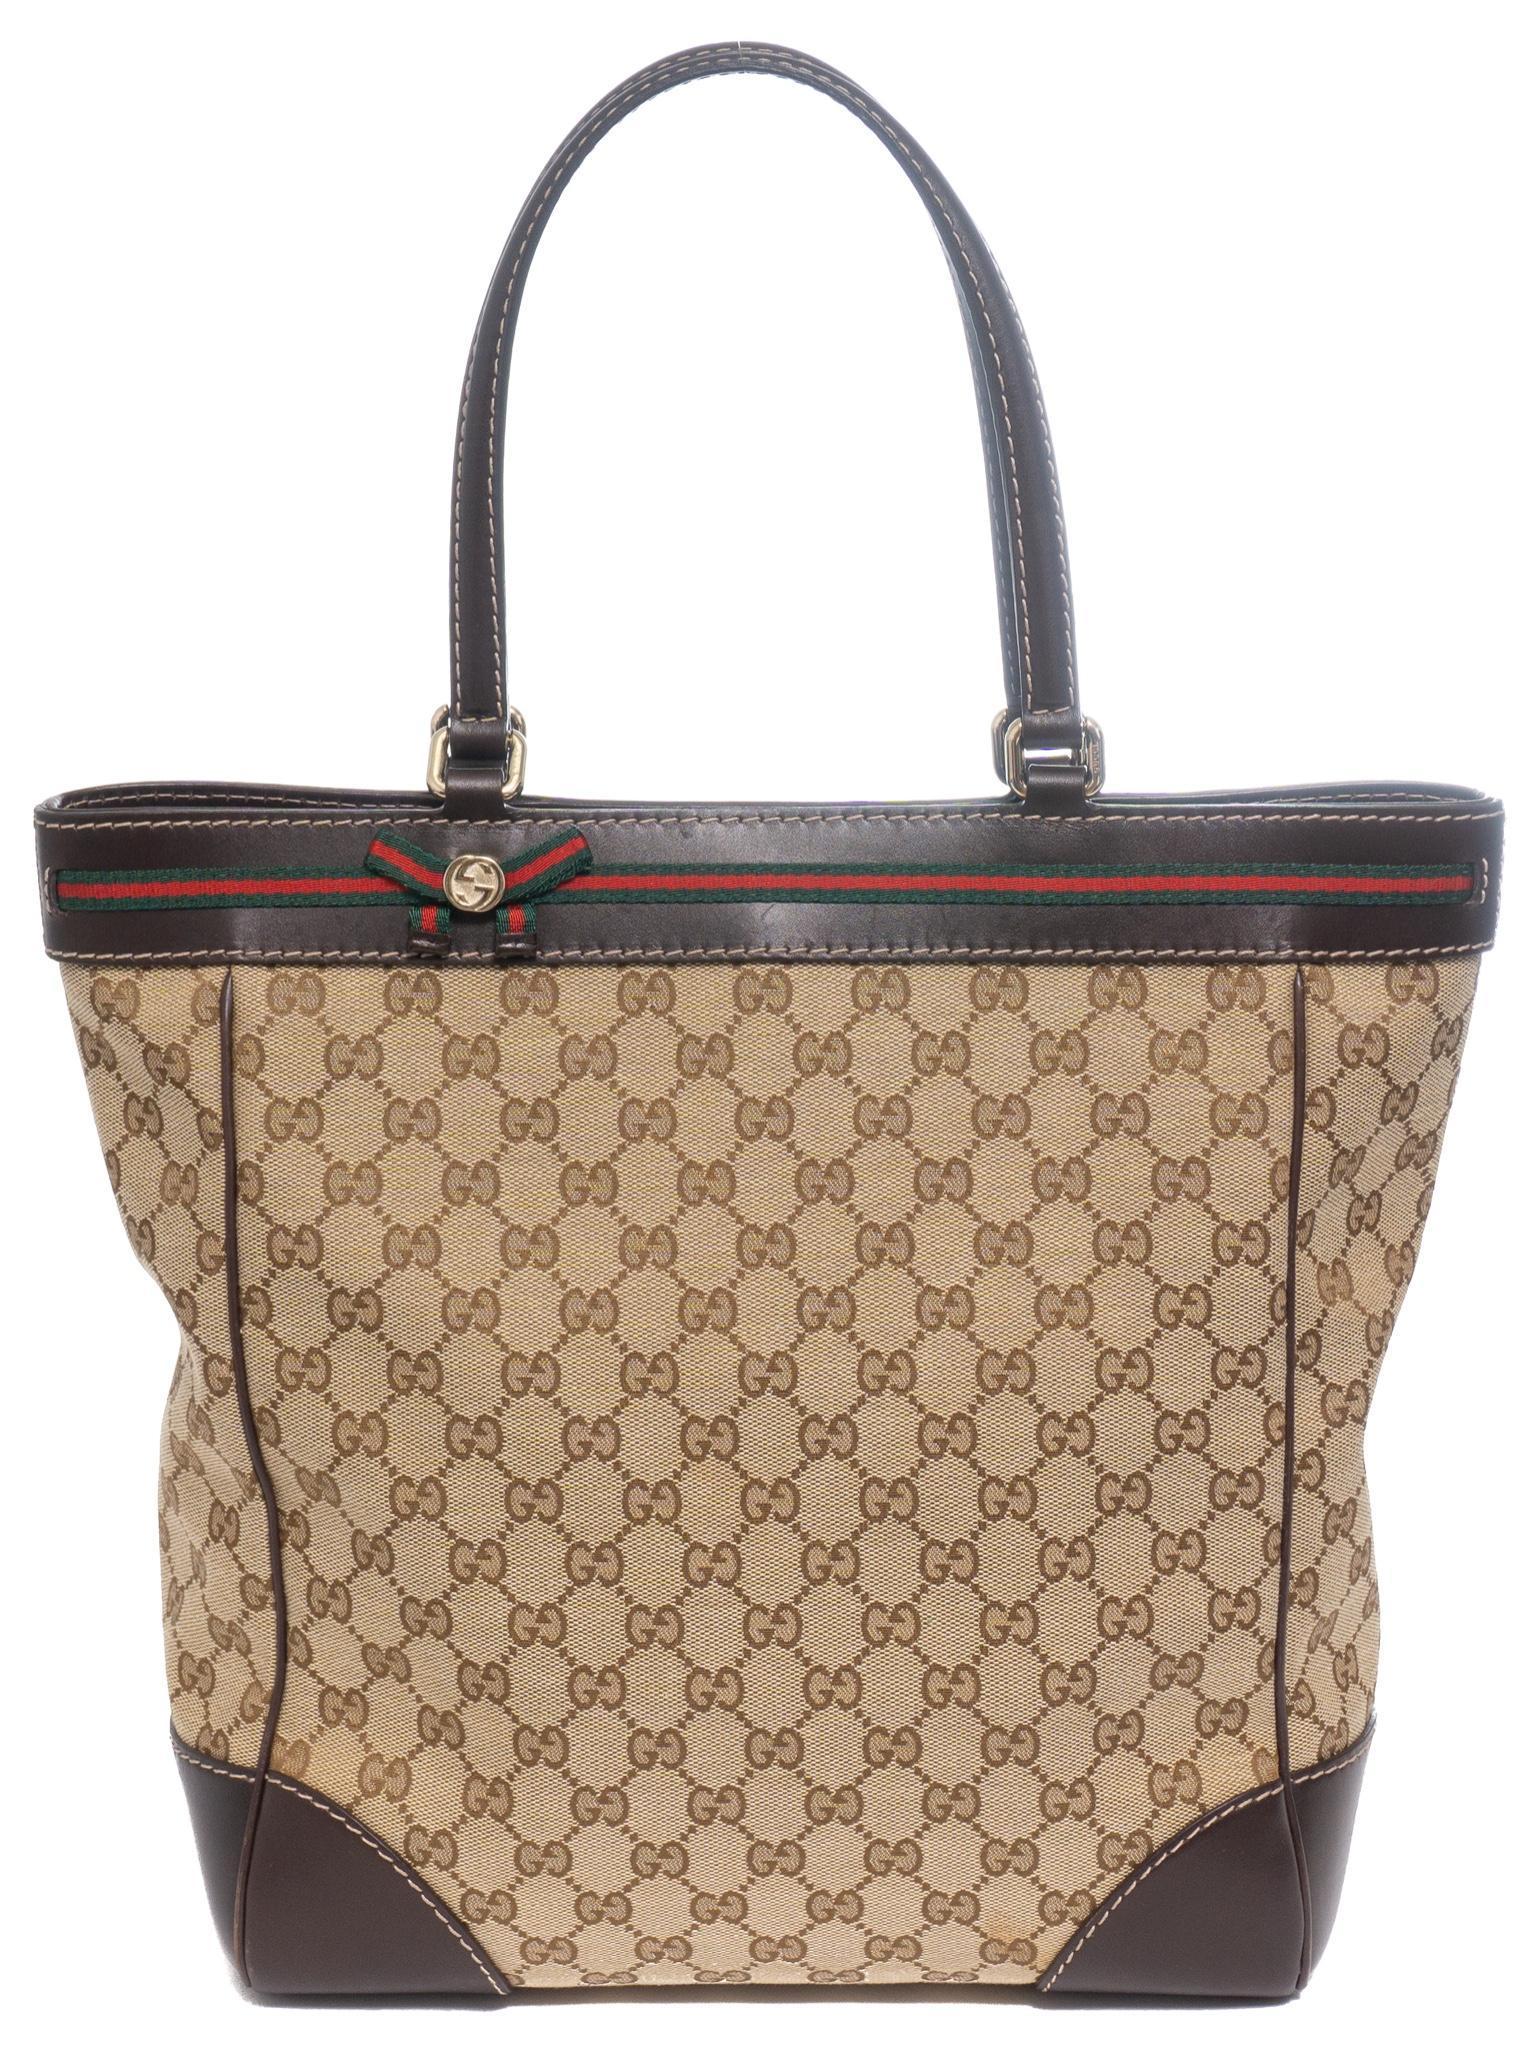 Sold at Auction: LOUIS VUITTON Weekender KEEPALL 45 BAND.